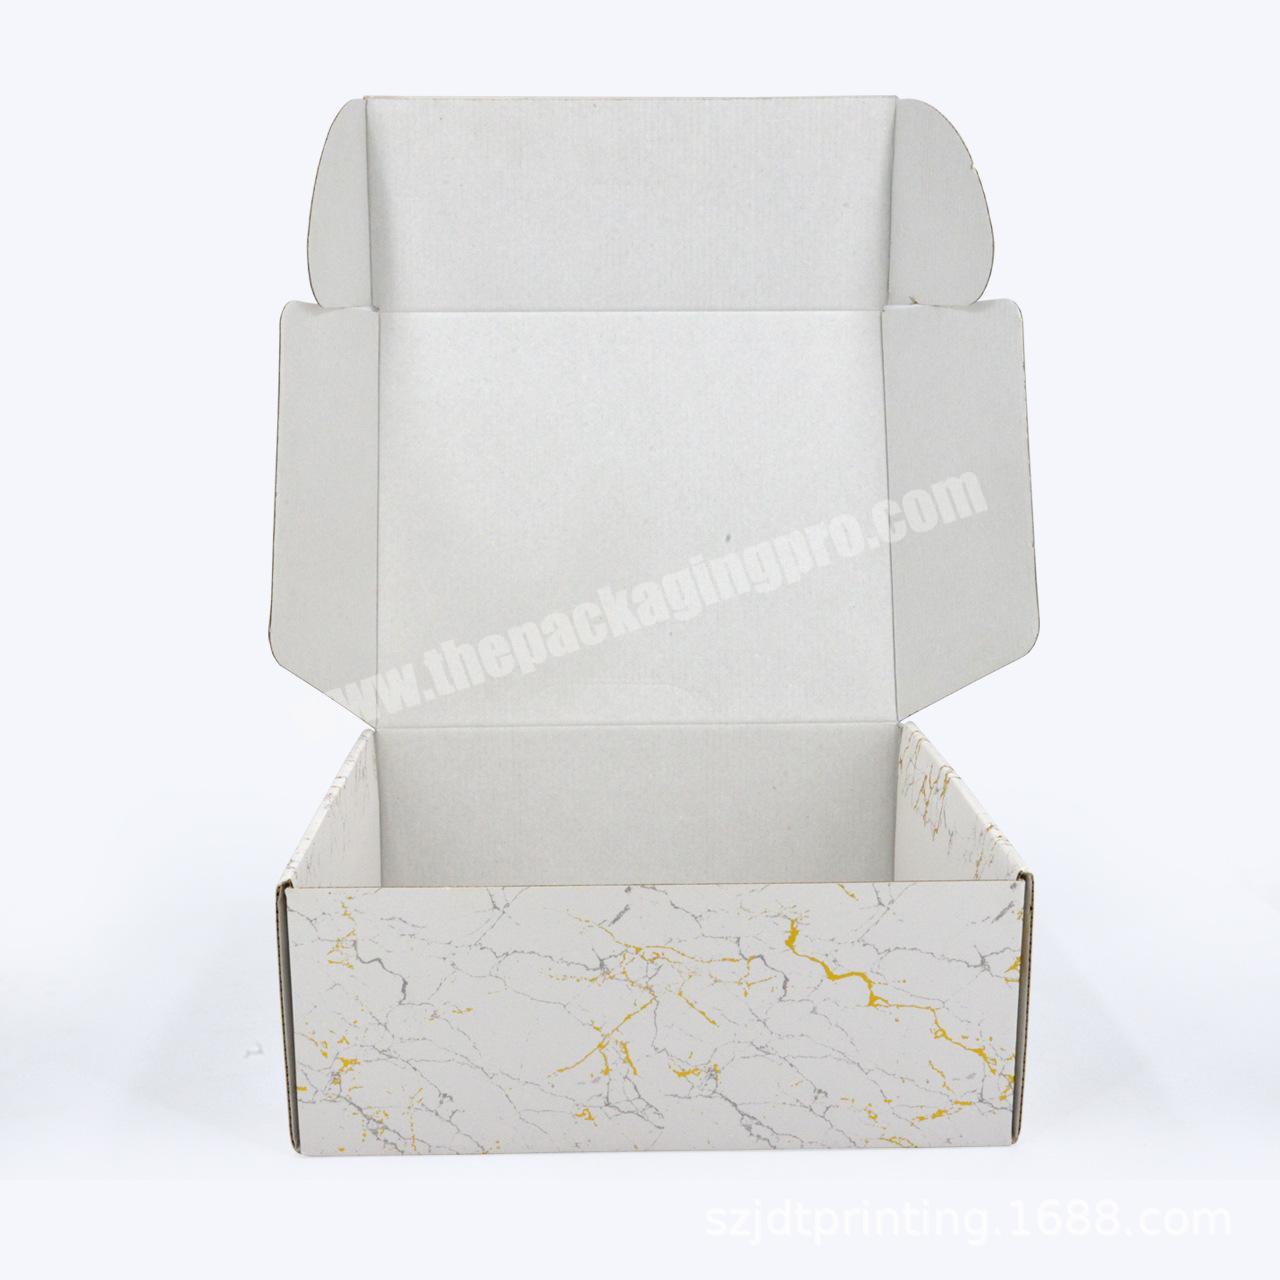 Free Design Logo Printed Kraft Paper 400g Cardboard 30 x 30cm White Gift Packing Boxes For Delivery